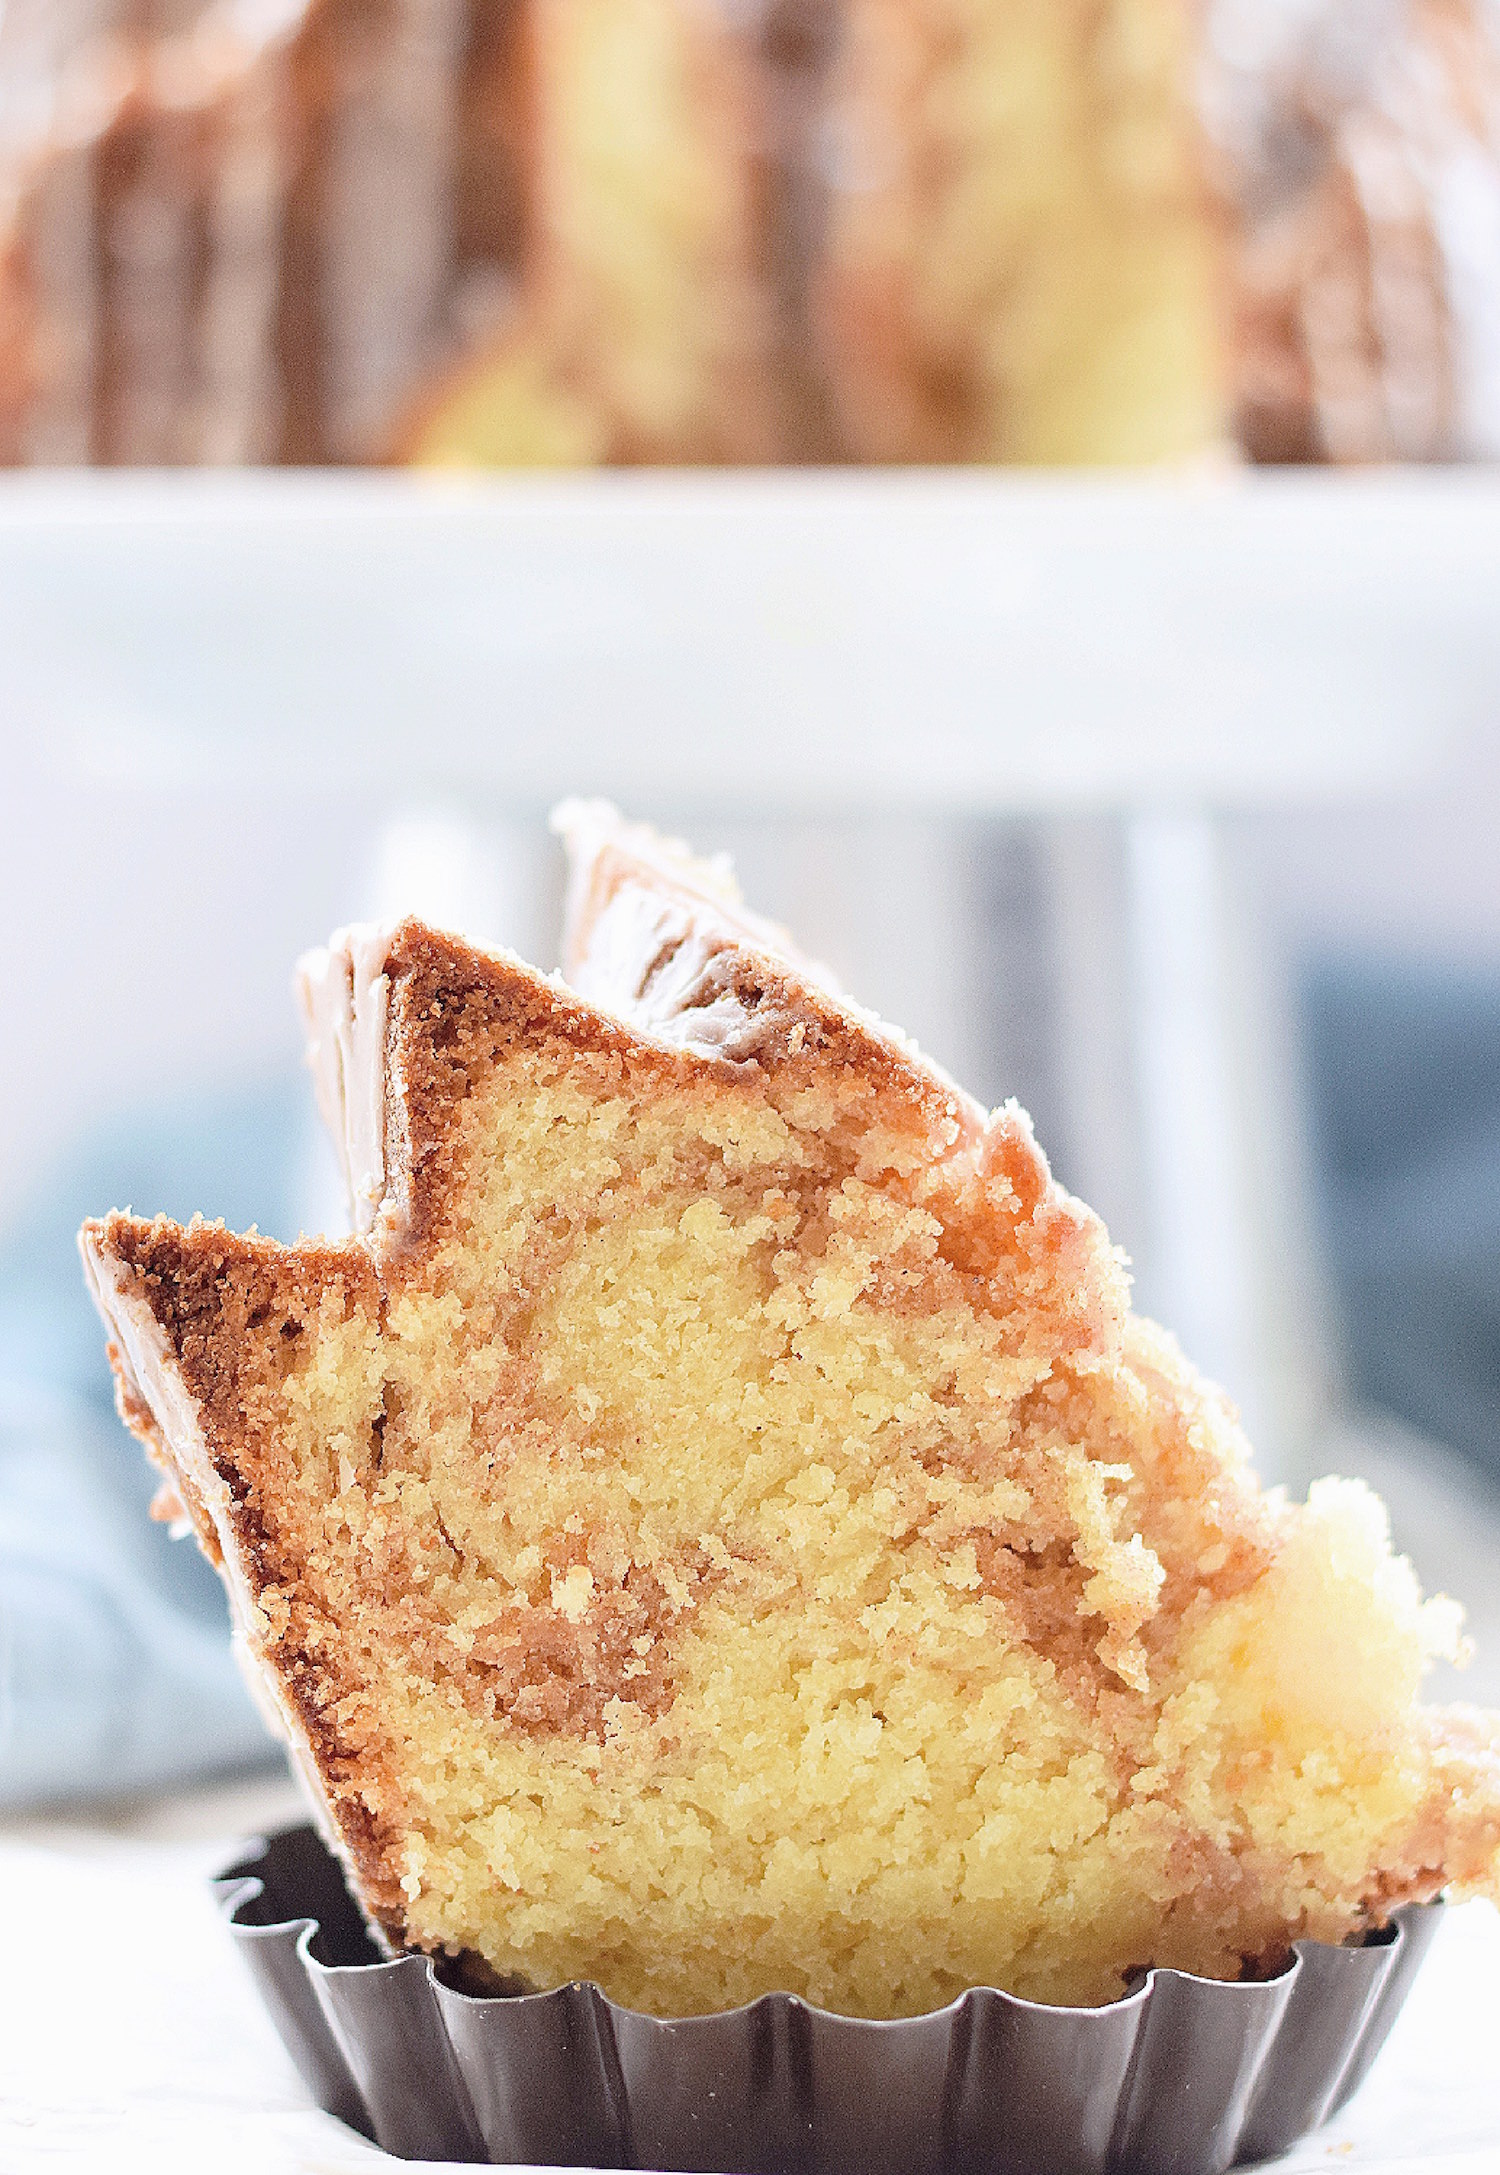 https://images.squarespace-cdn.com/content/v1/54a04011e4b0d1a214af85a9/1456695252281-FFLYK2TC9P8Y254WEB4P/Cinnamon+Swirl+Bundt+Cake%3A+one+bowl%2C+moist%2C+tender+vanilla+Bundt+cake+with+cinnamon+swirls.+Quick%2C+easy+and+completely+non-dairy%21+%7C+TrufflesandTrends.com